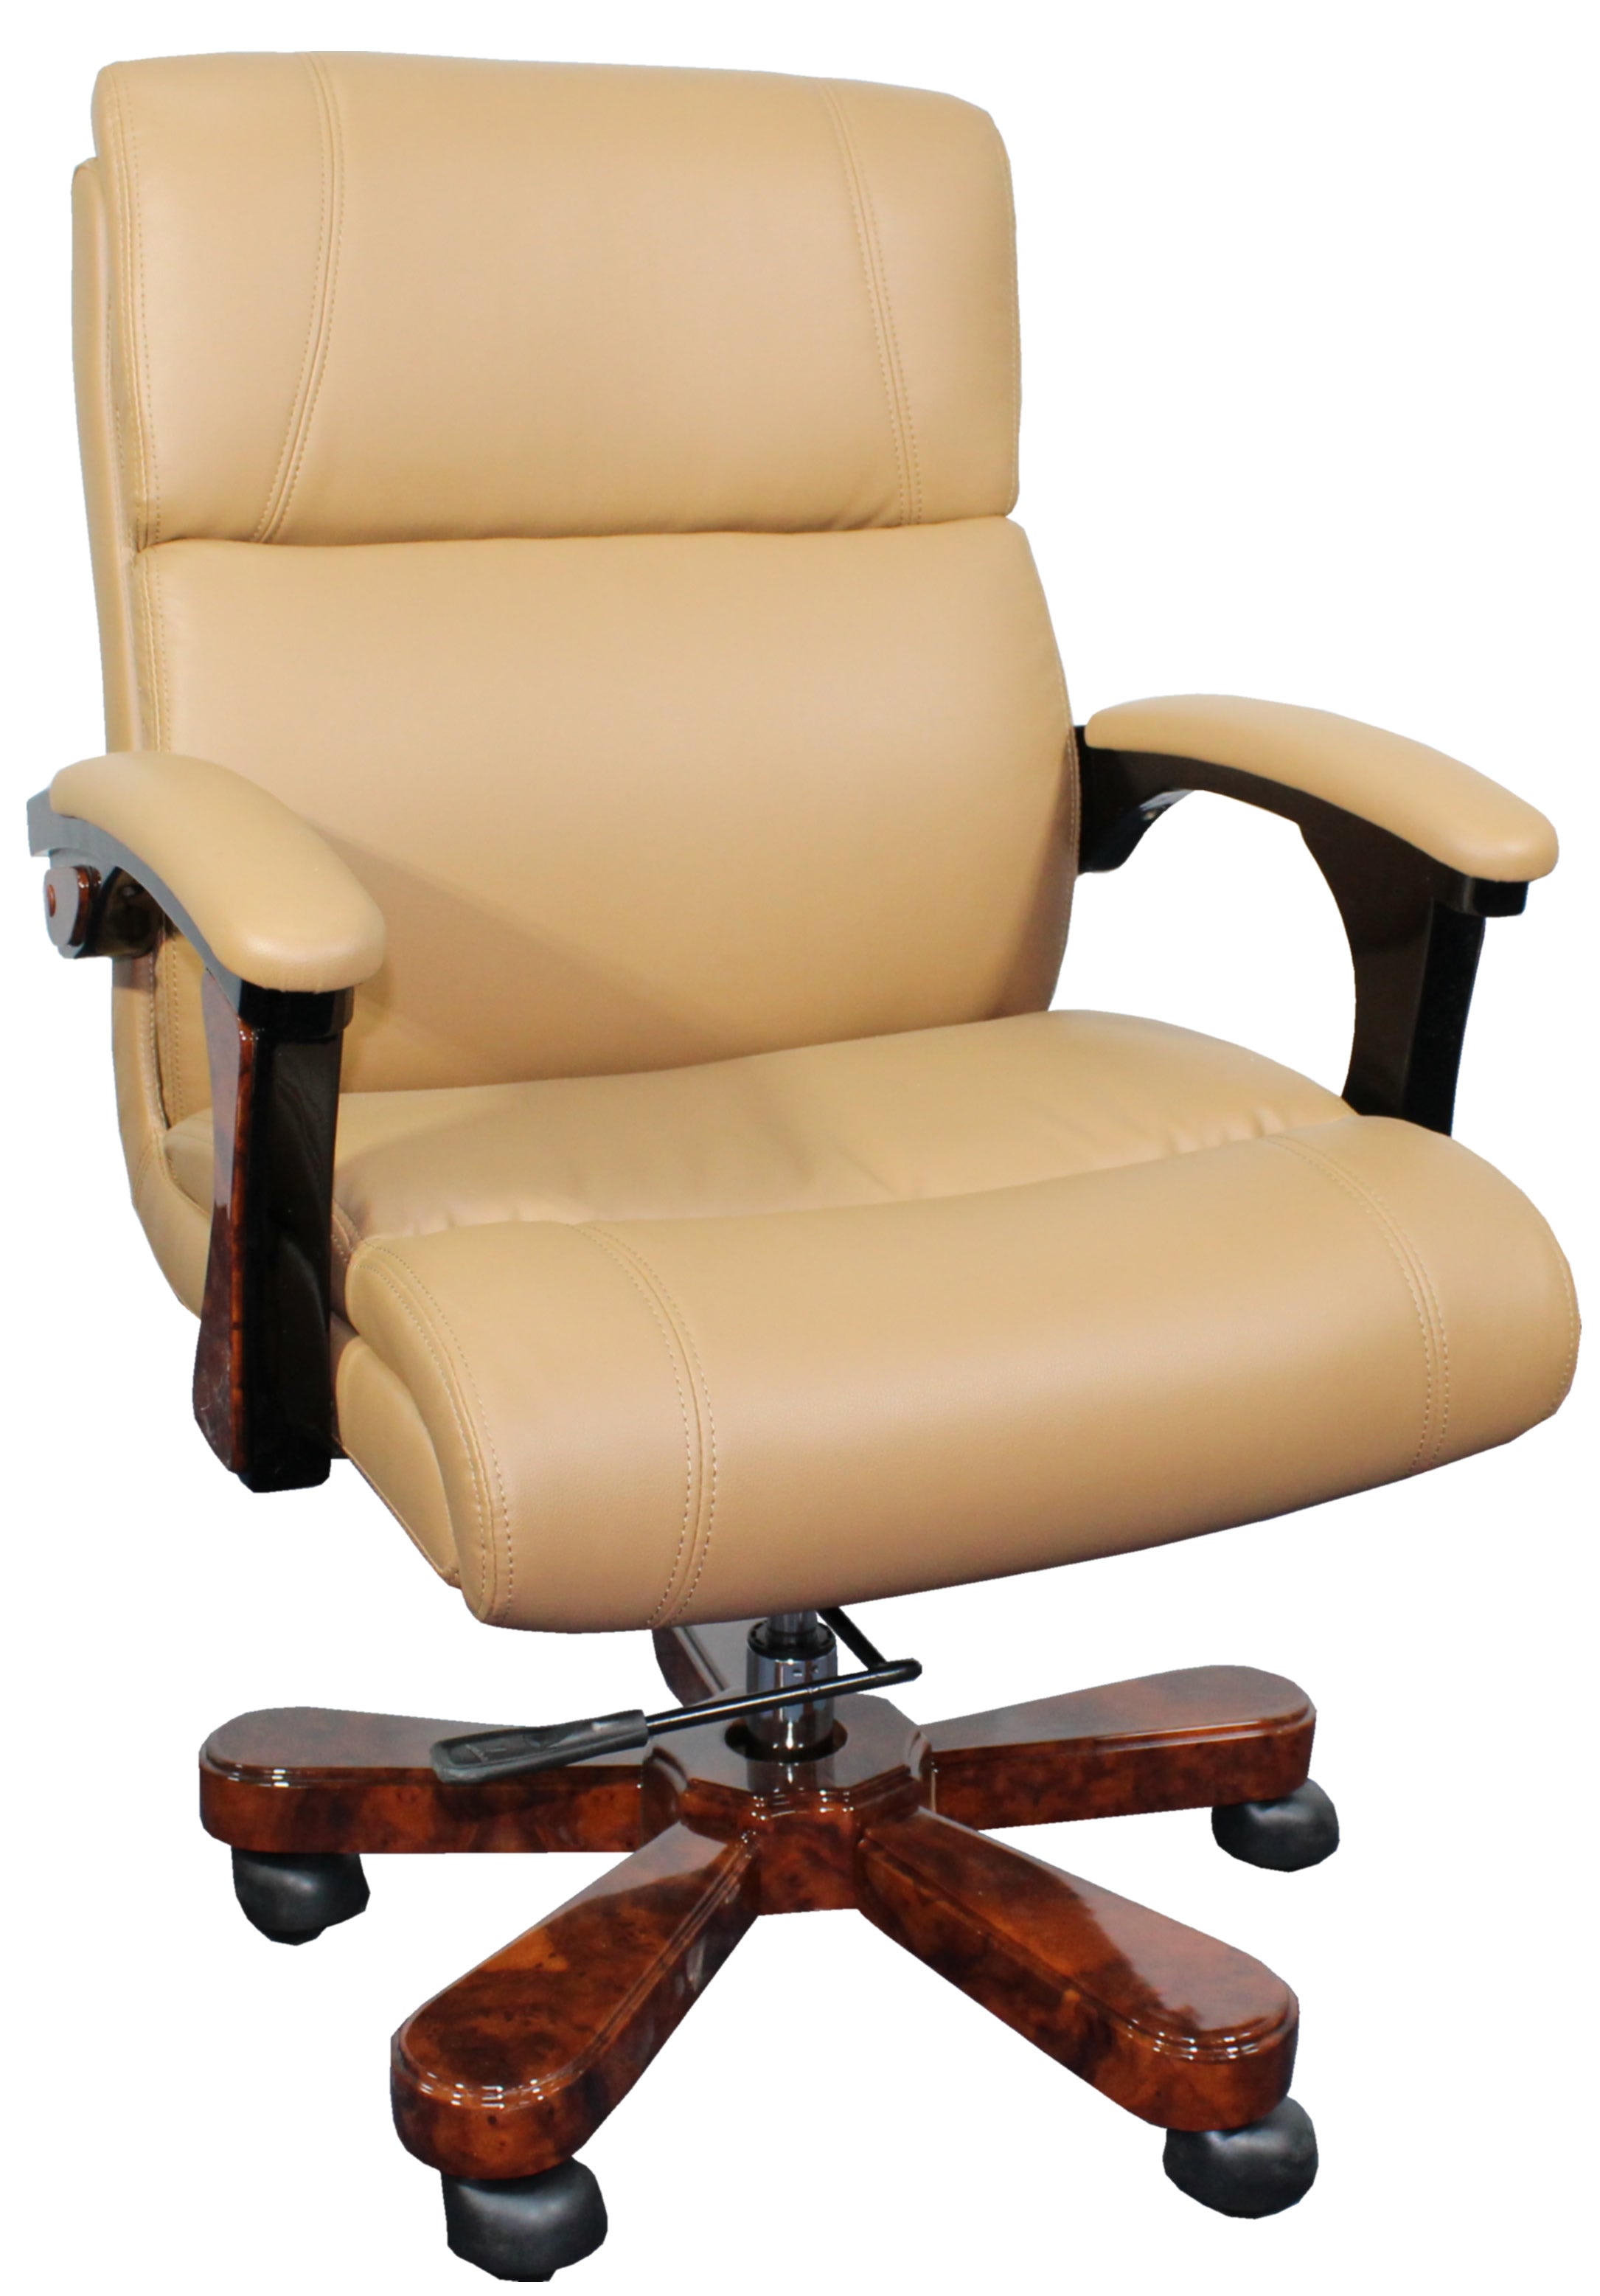 Luxury Executive Style Office Chair in Beige Leather - B018